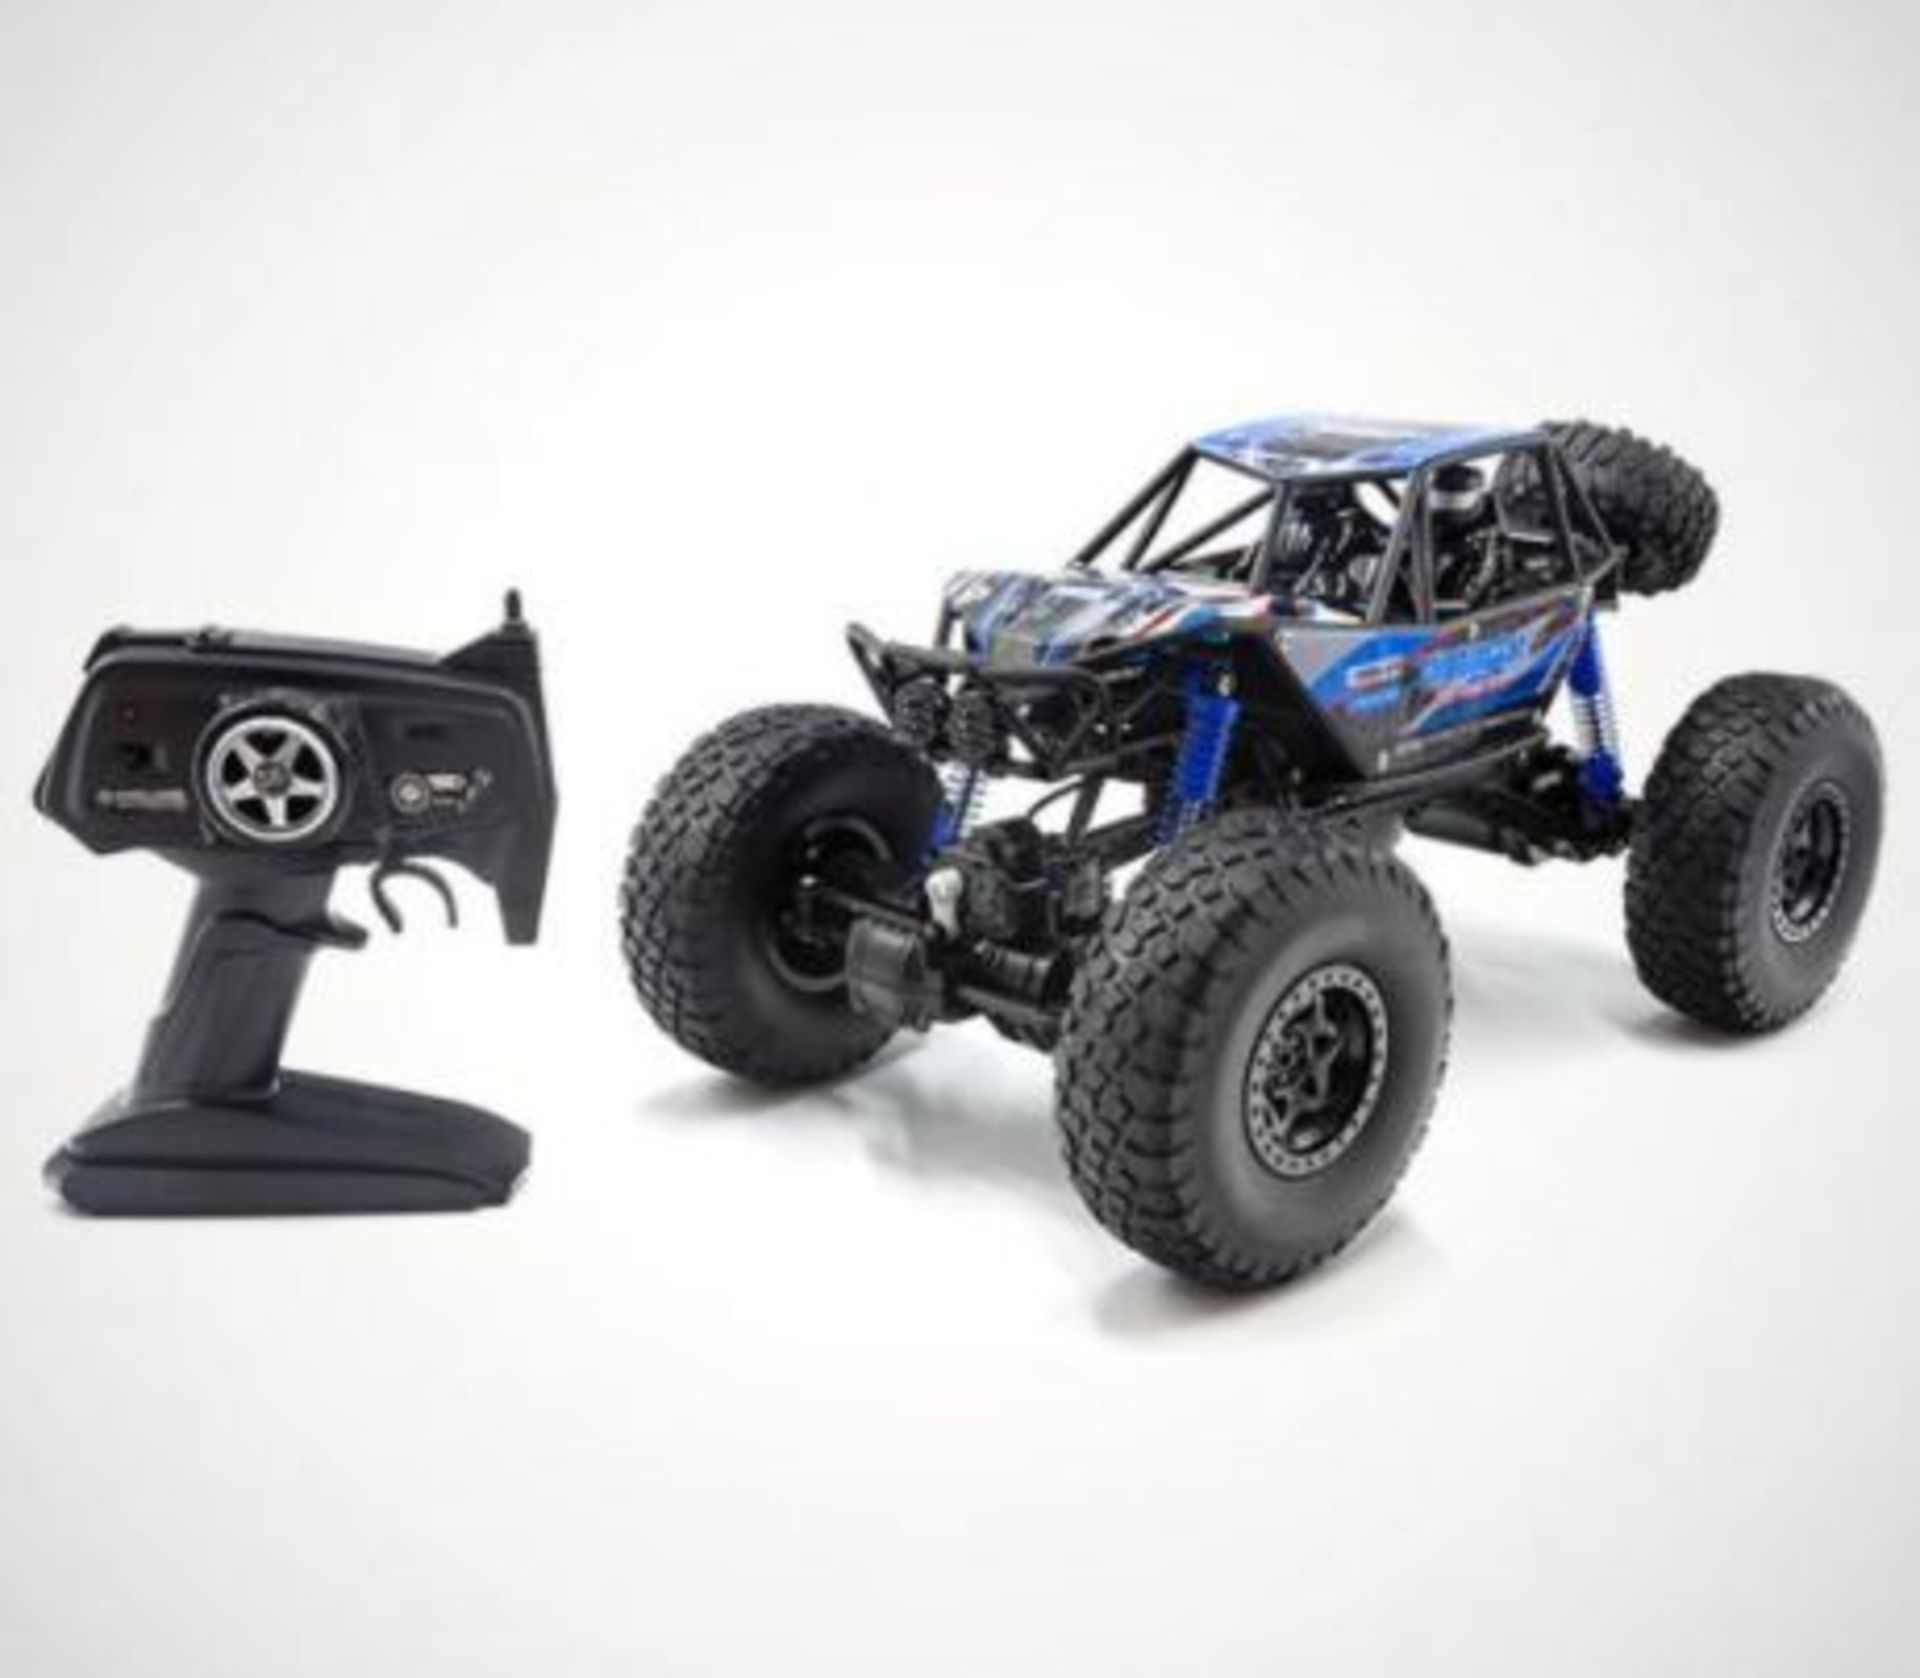 2x Red5 RC Dune Buggy 4WD RRP £59.99 Each. (Units Have RTM Sticker)